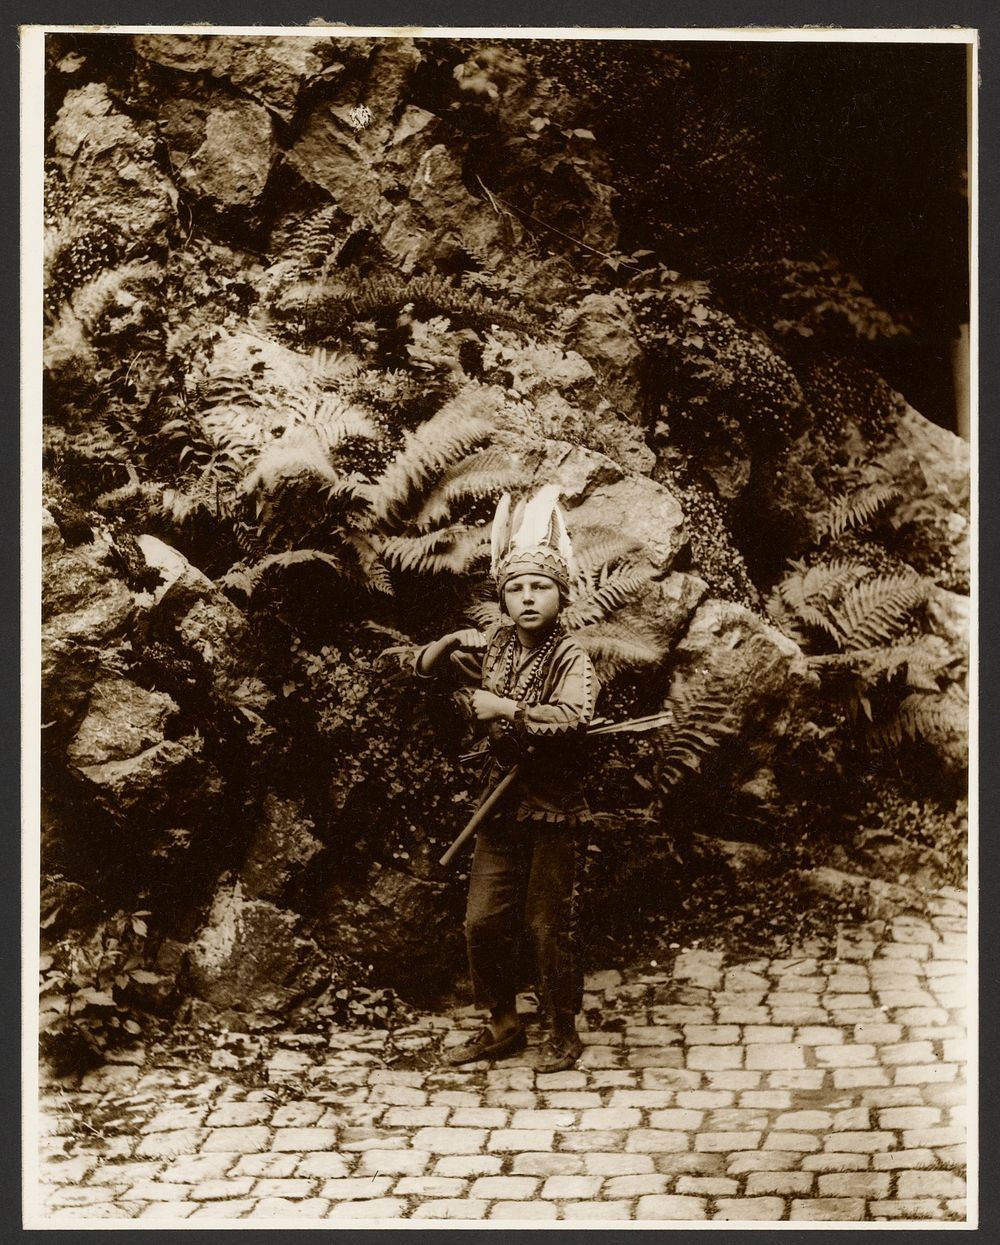 Boy Dressed as an Indian Posed in Front of Ferns by Alphonse Maria Mucha